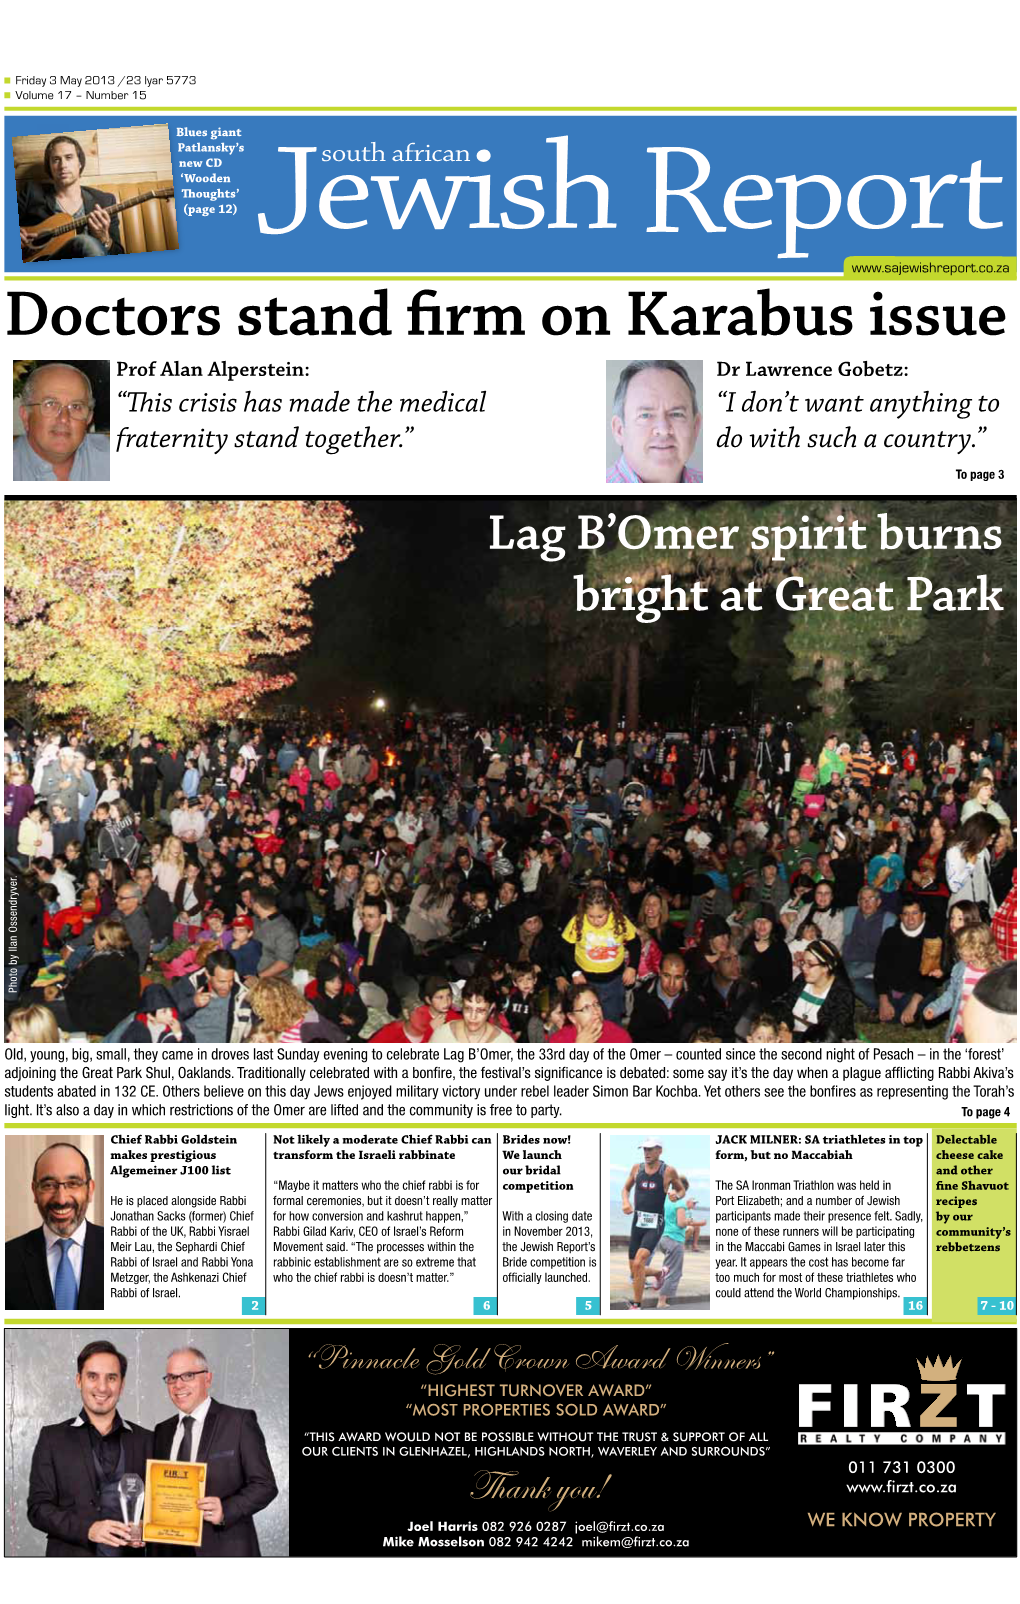 Doctors Stand Firm on Karabus Issue